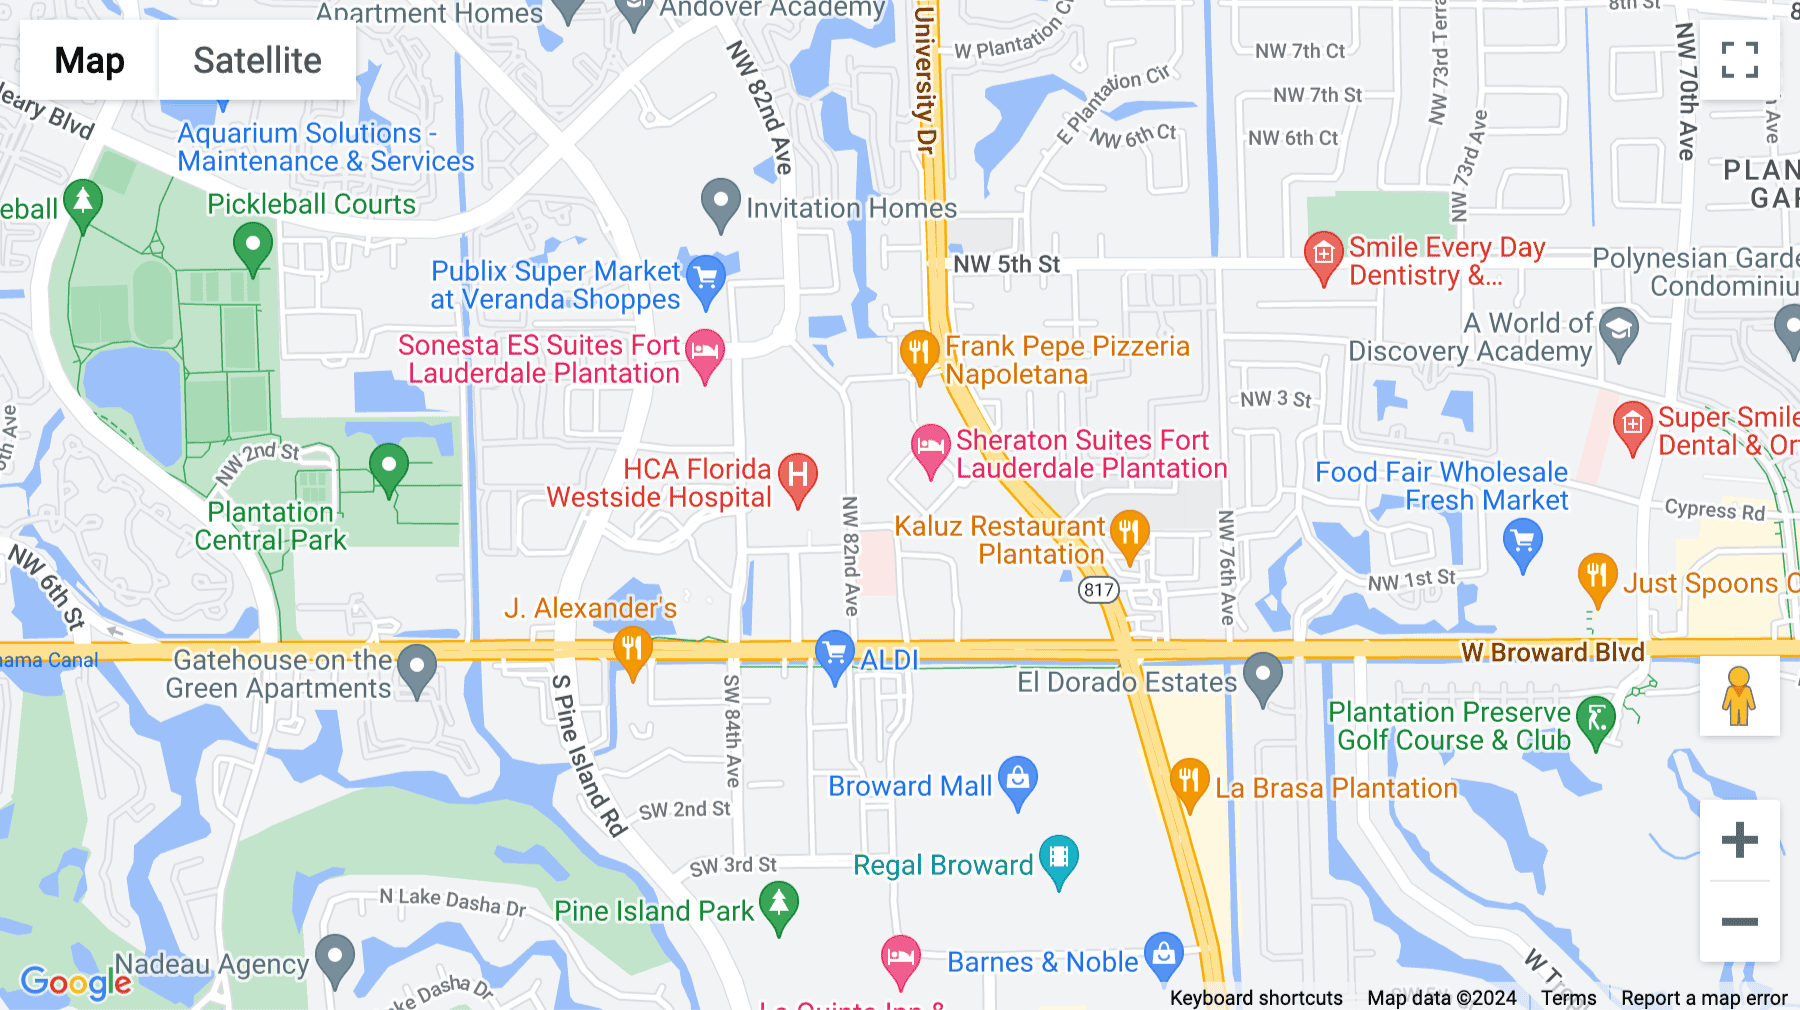 Click for interative map of 261 N University Drive, Suite 500, Plantation